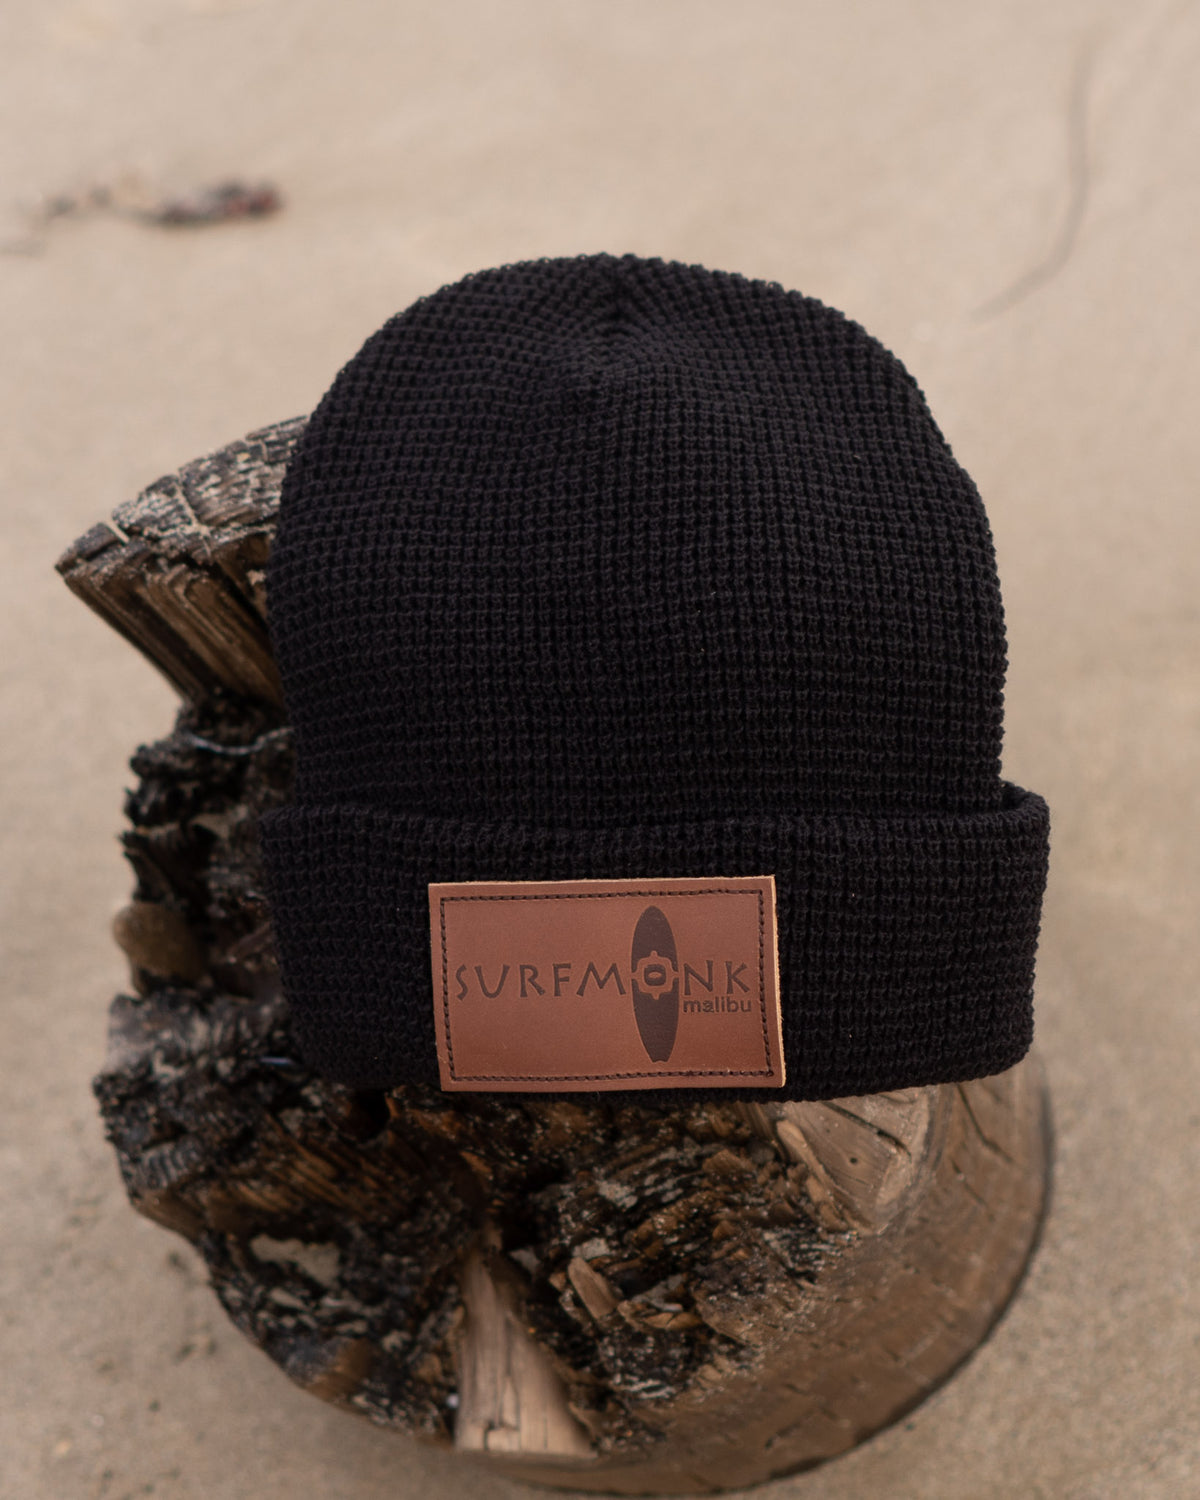 Beanie - Black Knit with embossed Surfmonk logo patch.